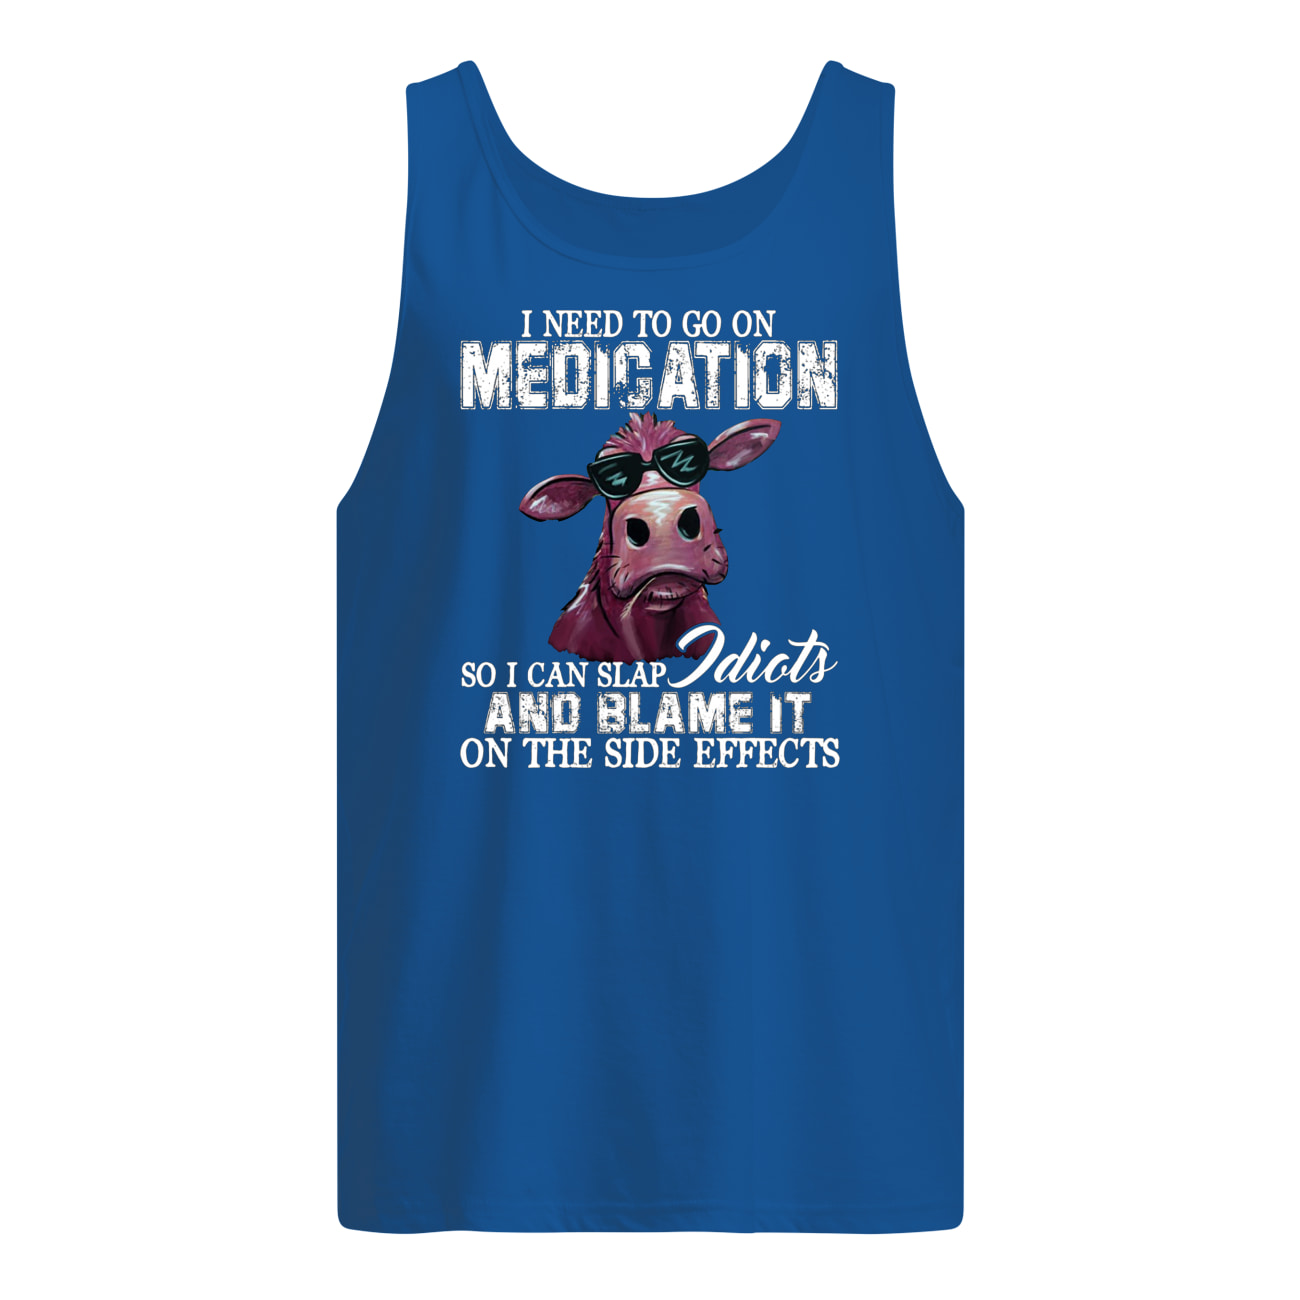 I need to go on medication so I can slap idiots and blame it on the side effects cow tank top